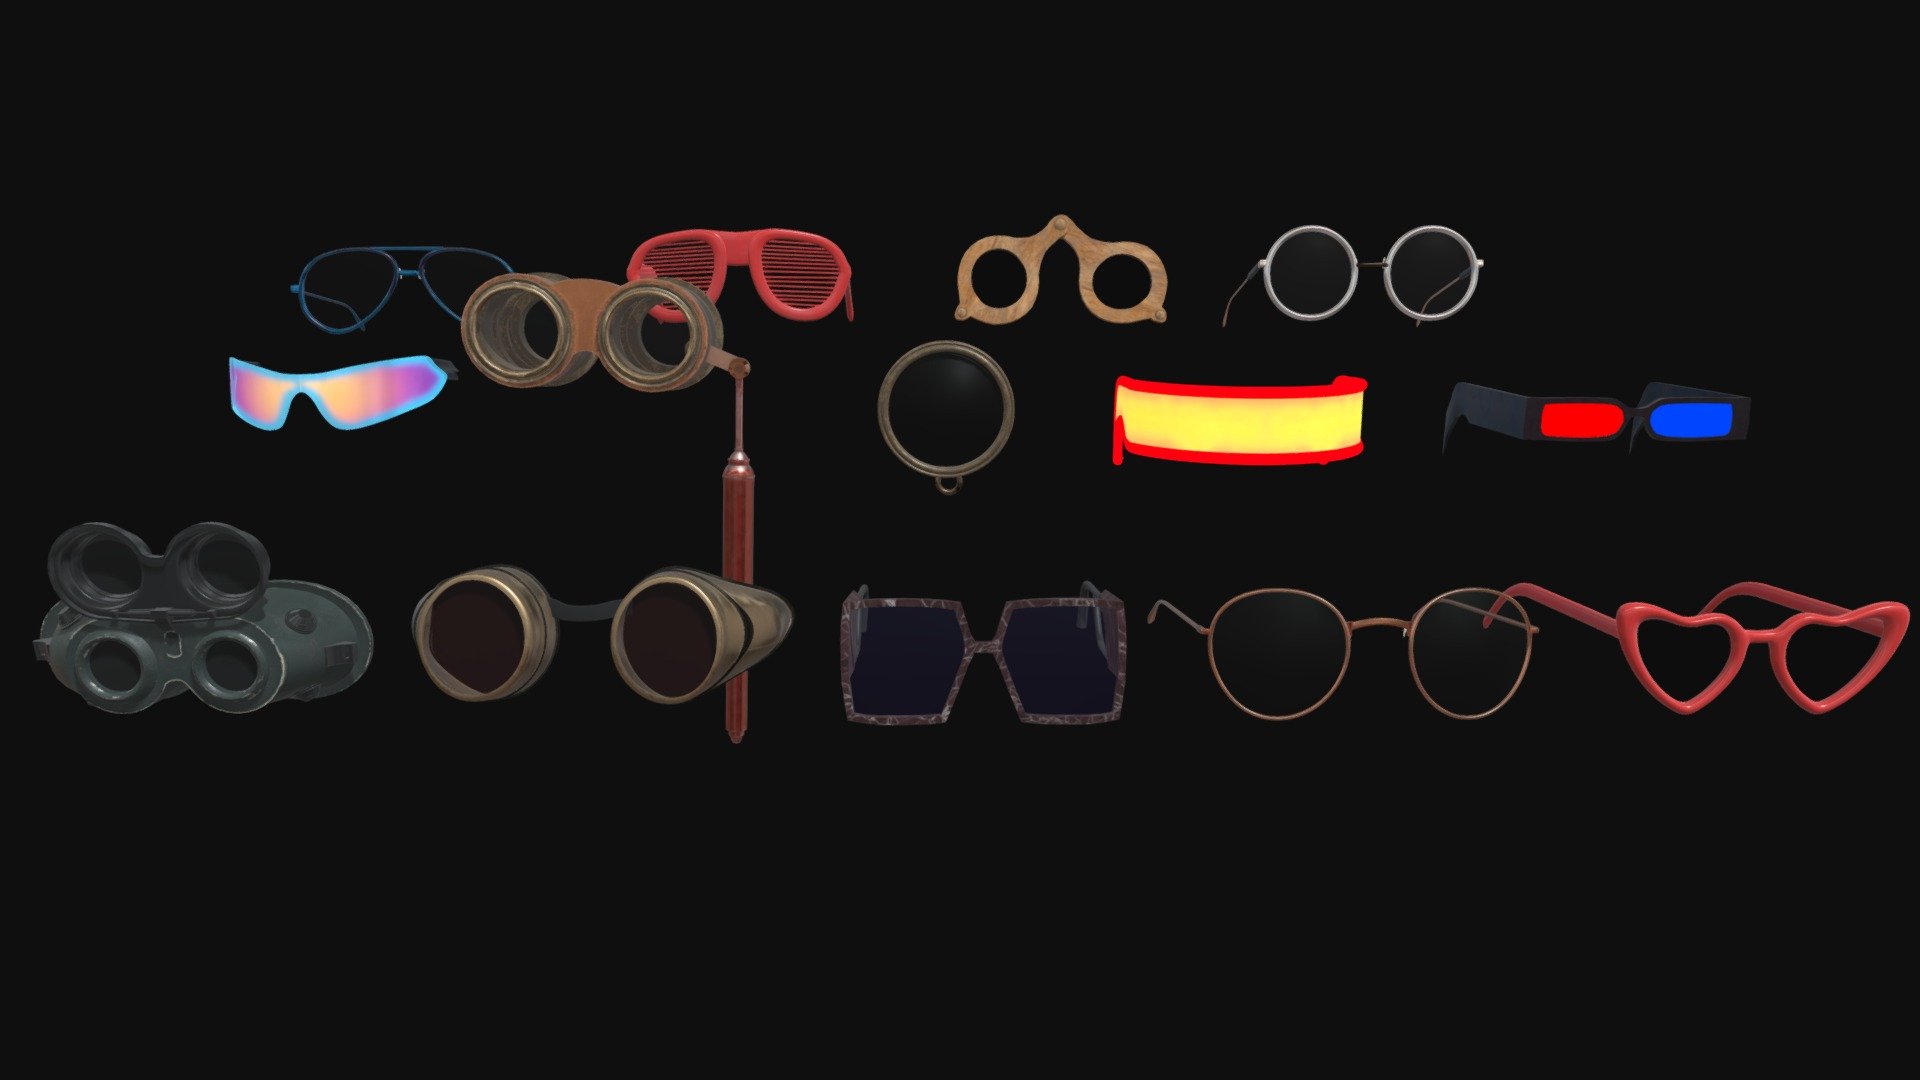 this is a collection of diferent types of glasess, this collection has:
-cine glasses 
-office glasses 
- opera glasses 
- welding goggles
- cyberpunk glasses 
- monocle
- glasses with style
-  heart glasses
-  medieval glasses
-  steampunk glasses

I hope you like it, i’m a 3d modelator of colombia. if you want to contact me you can do in: juancamilojr0212@gmail.com or in discord: batman_comunista#3772 and follow me in instagram: https://www.instagram.com/juanjimenez0212/?hl=es-la

thanks for see! - glasses collection - Download Free 3D model by mister_monopoly 3d model